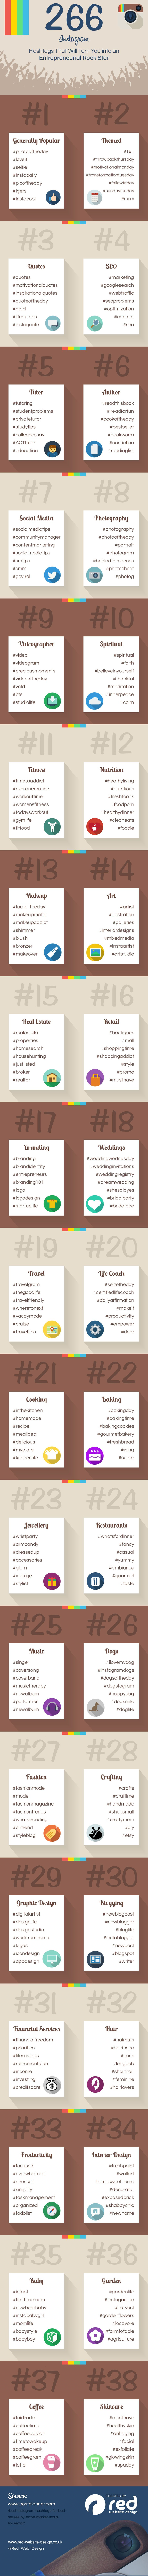 instagram hashtags for business